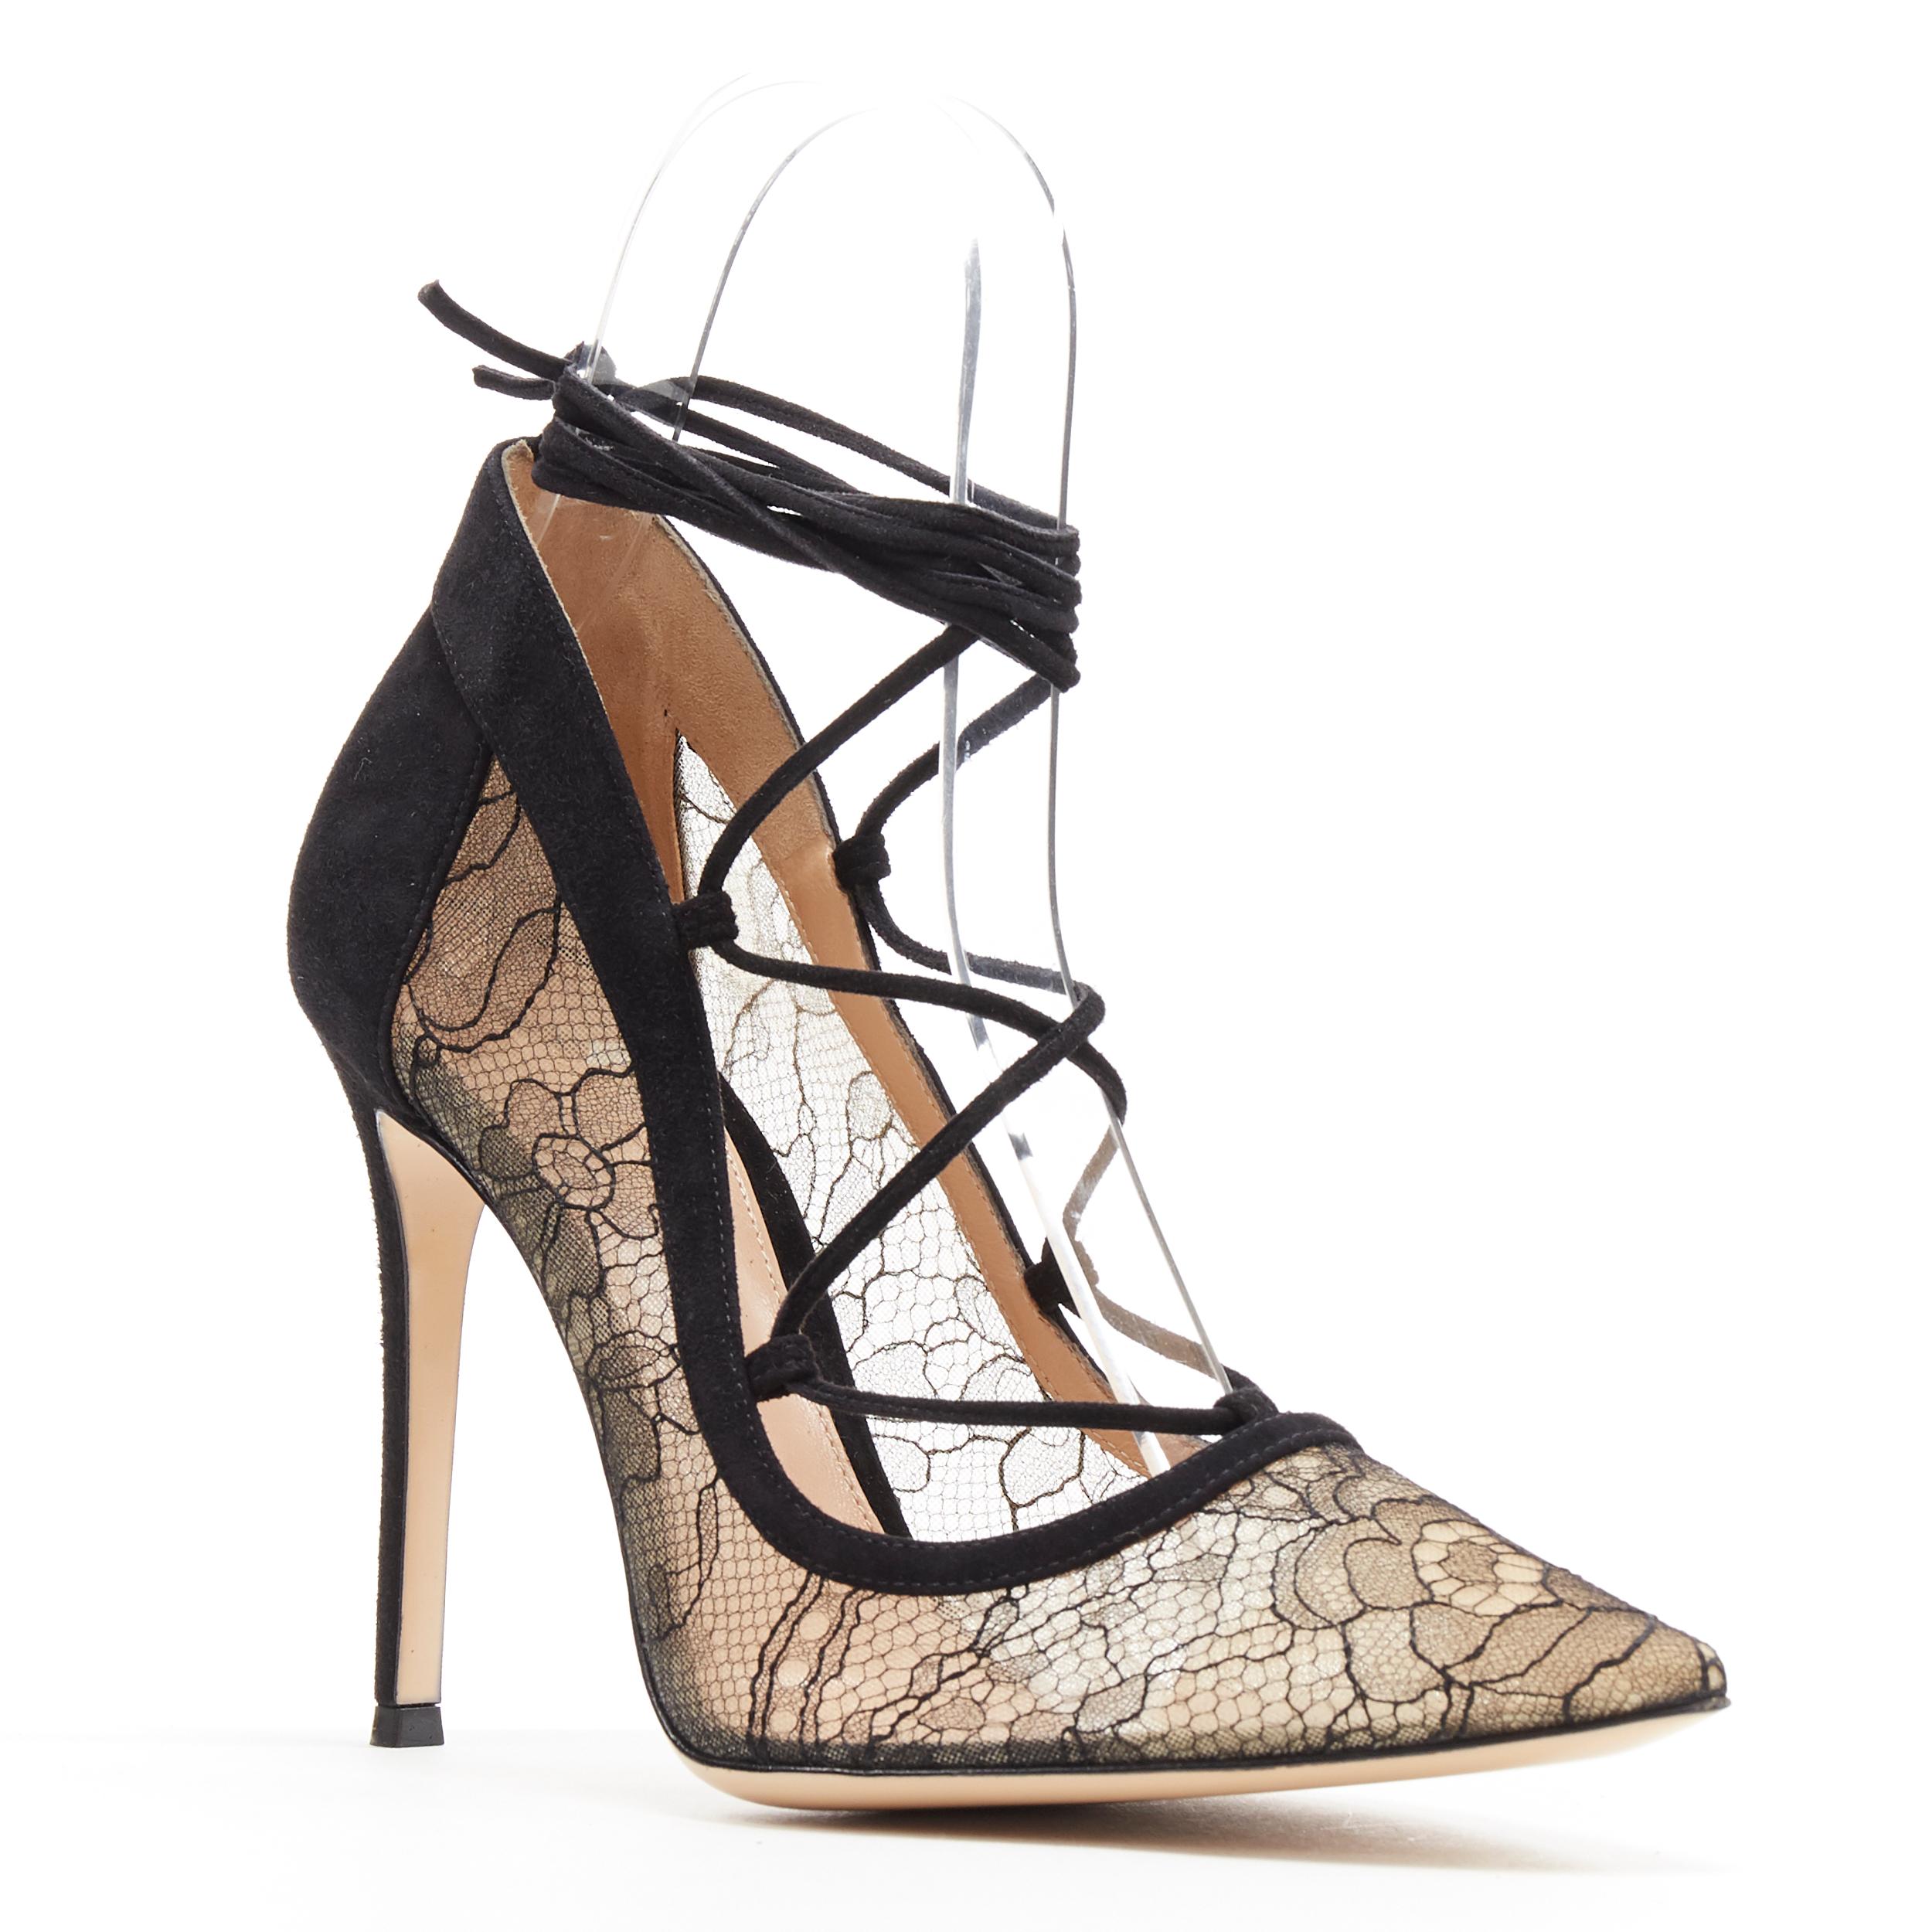 new GIANVITO ROSSI black floral lace nude mesh lace up strappy pump EU38
Brand: Jimmy Choo
Designer: Jimmy Choo
Model Name / Style: Lace up pump
Material: Suede
Color: Black
Pattern: Floral
Closure: Lace up
Extra Detail: High (3-3.9 in) heel height.